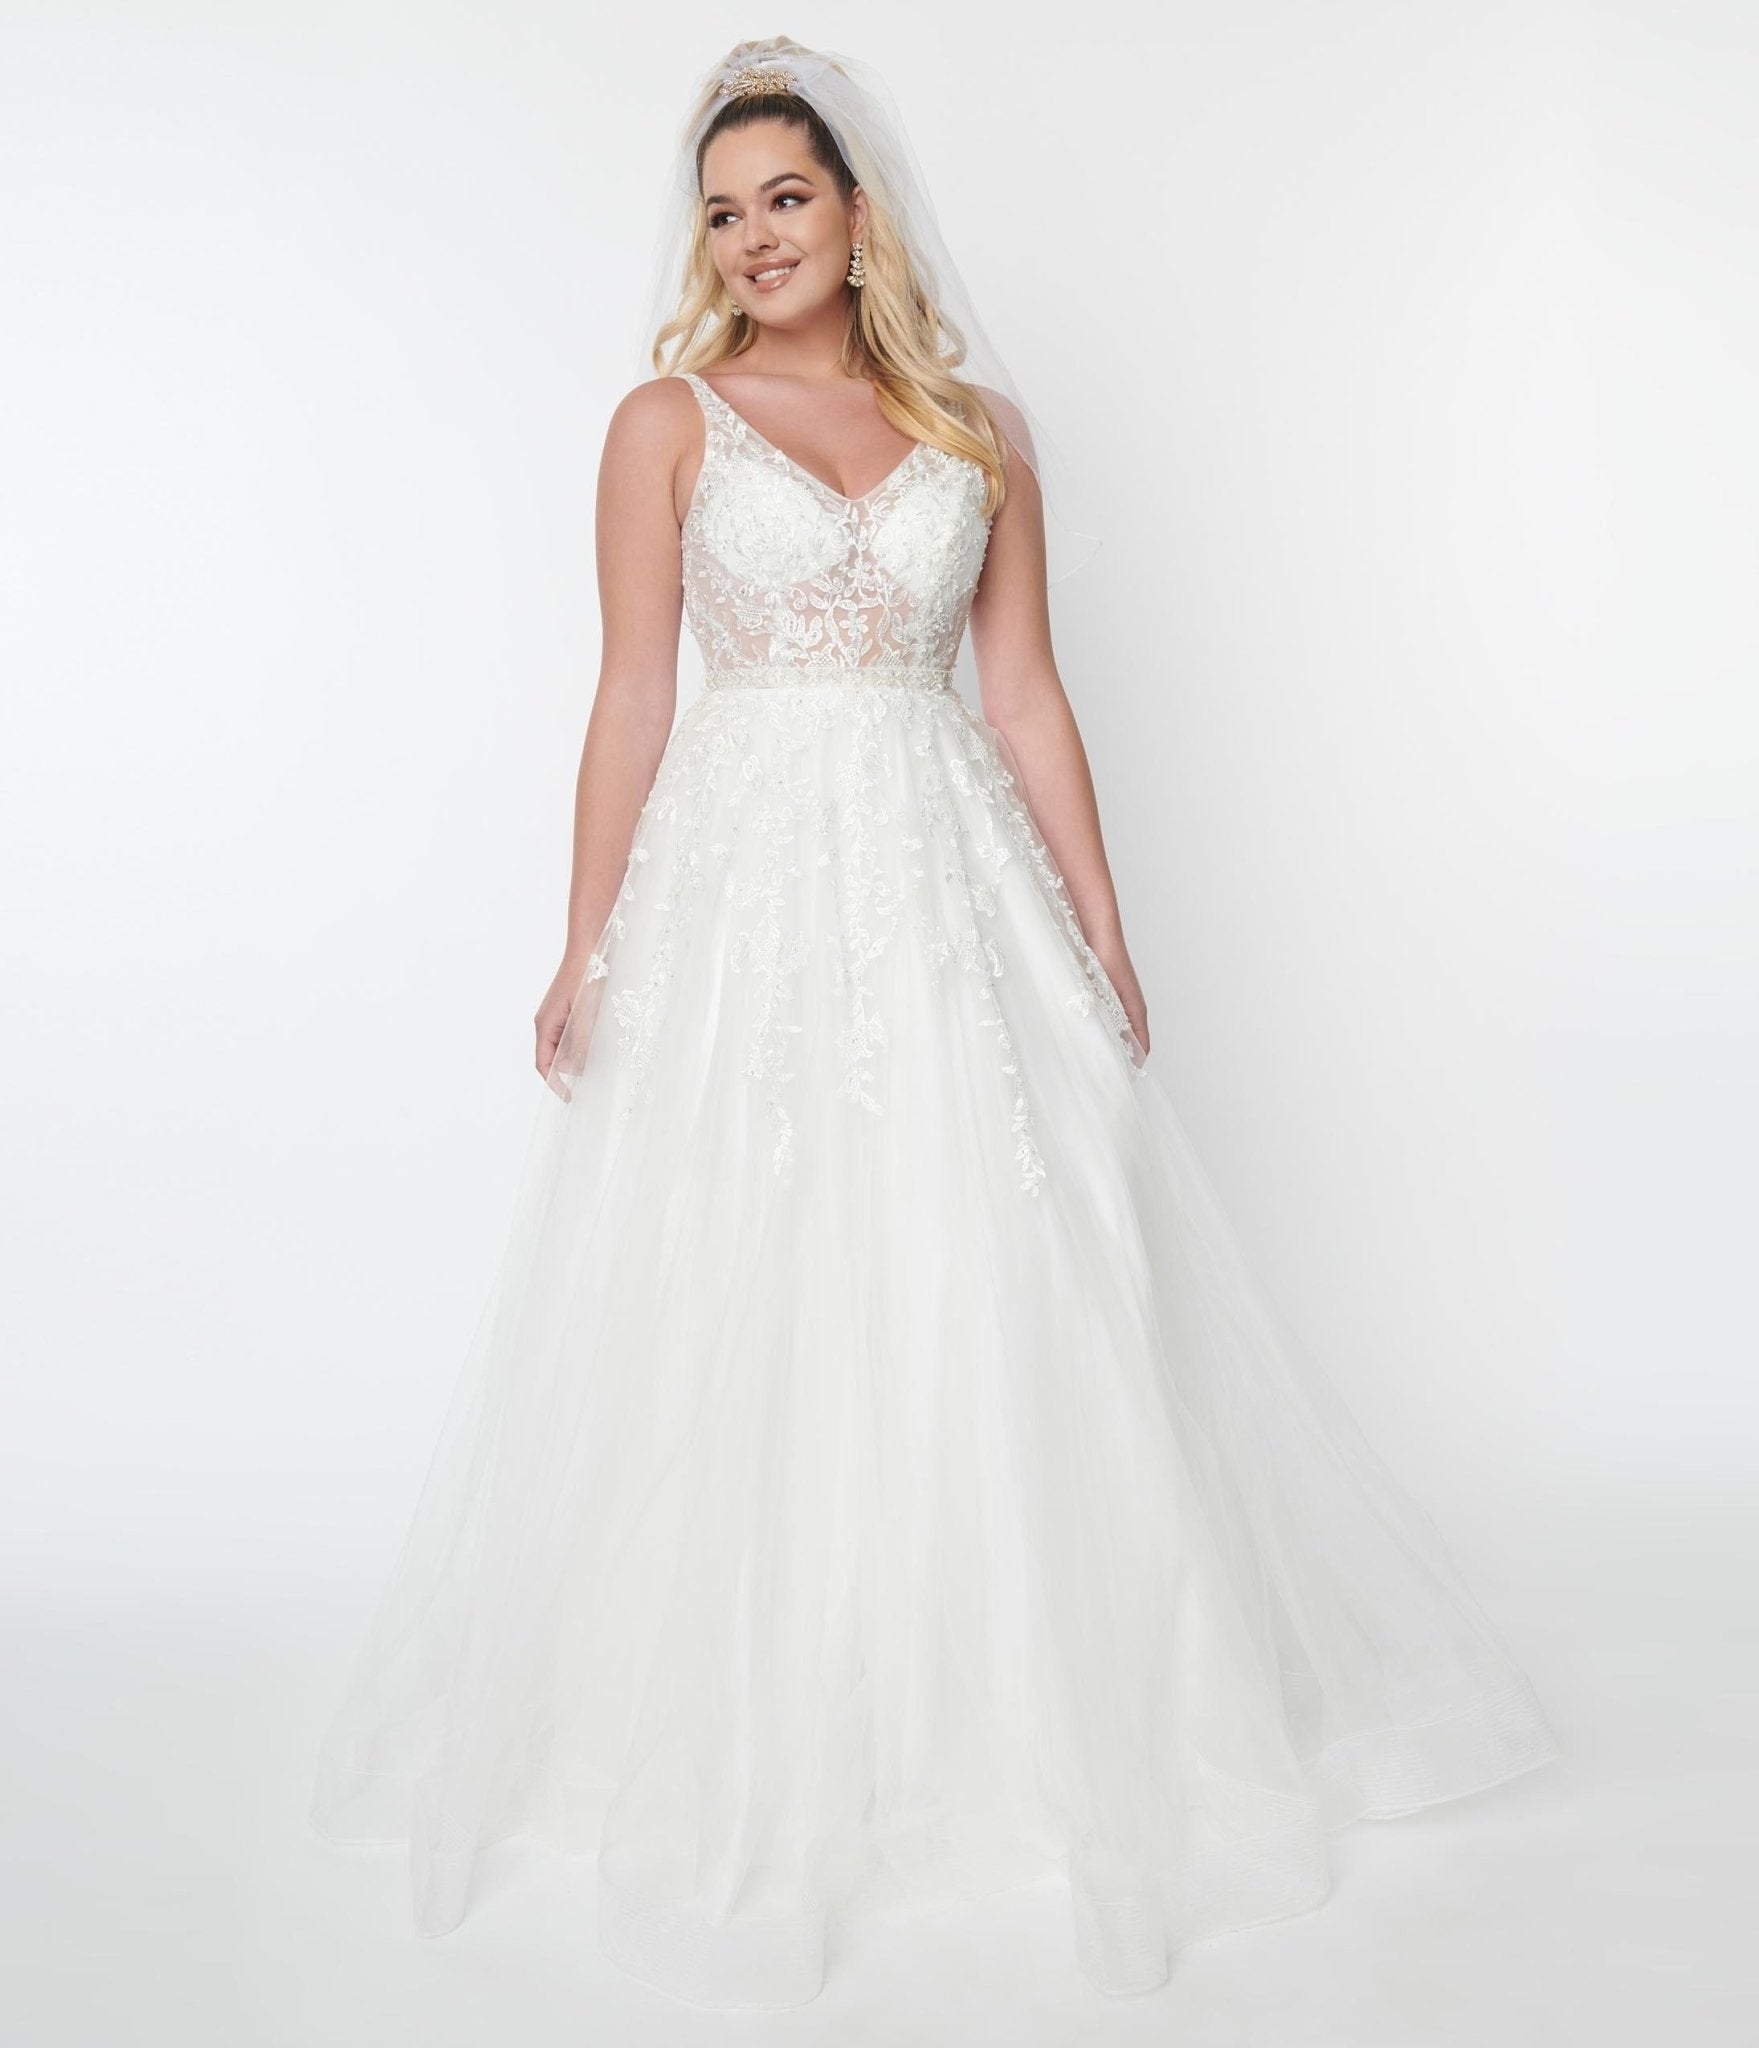 Halter Top, Floral Sequins Throughout, Long Tulle Gown – The Queen's Lace